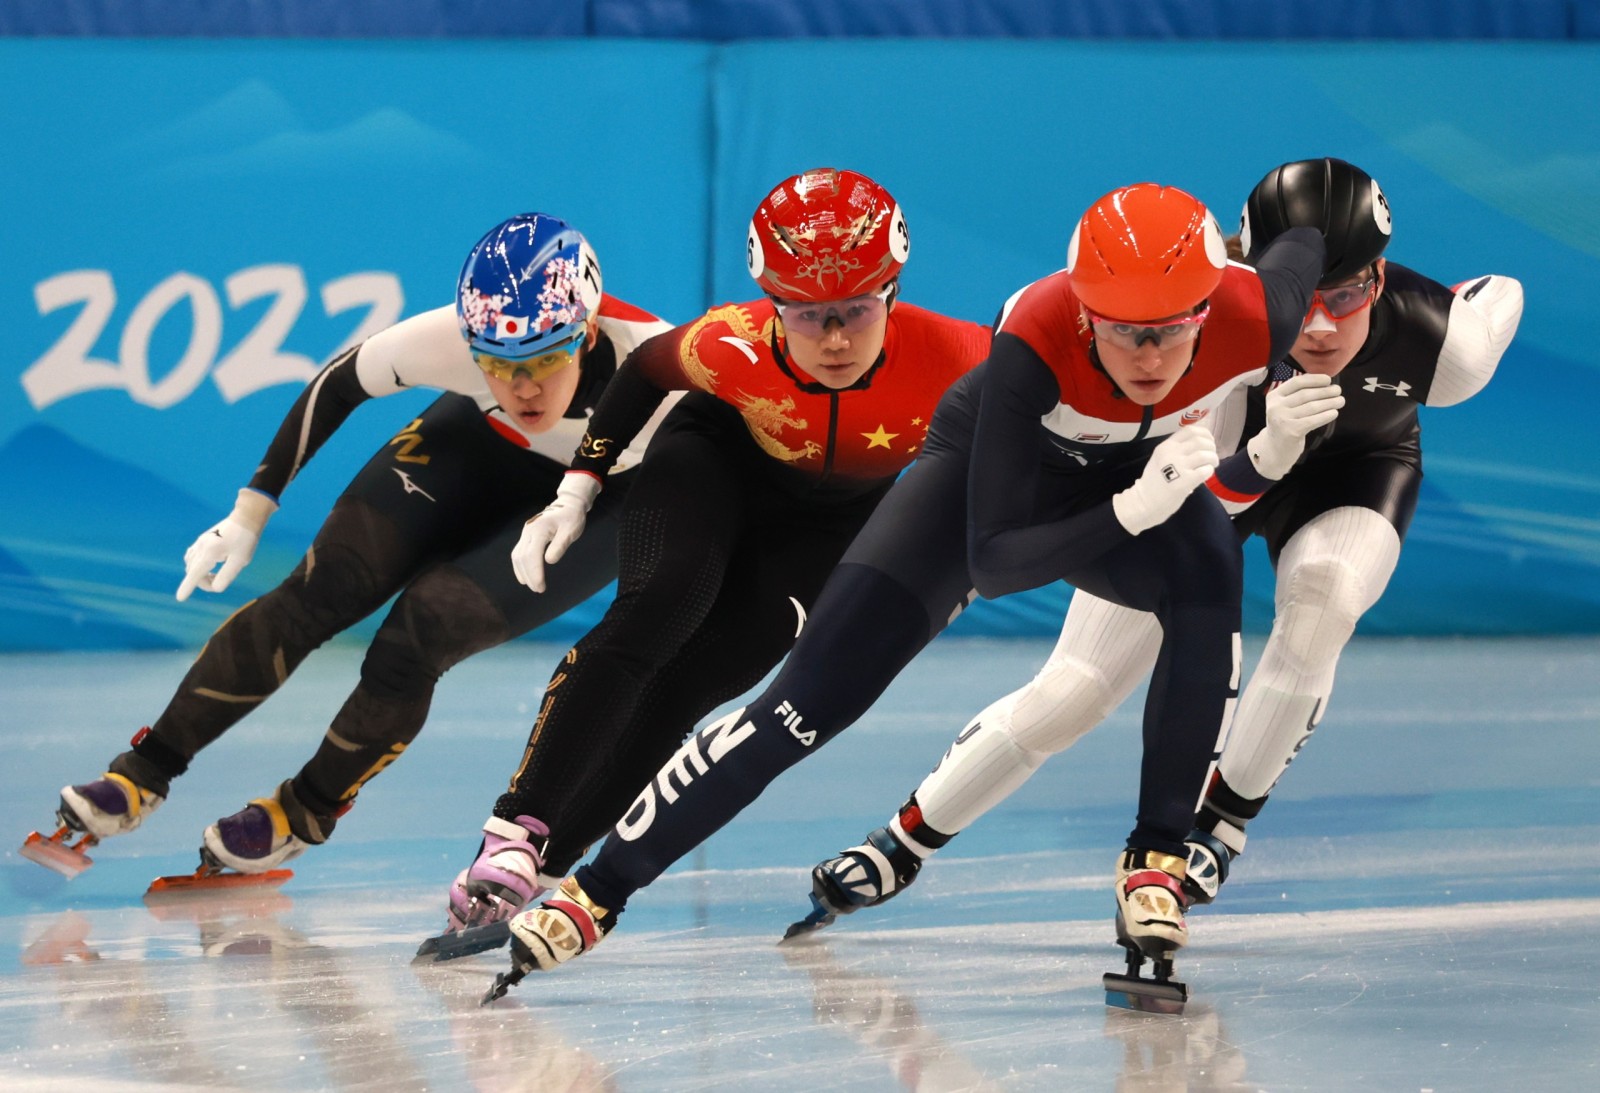 epa09740844 Suzanne Schulting (2nd R) of the Netherlands leads the pack during the Women's 1000m heats of the Short Track Speed Skating events at the Beijing 2022 Olympic Games, Beijing, China, 09 February 2022.  EPA/FAZRY ISMAIL